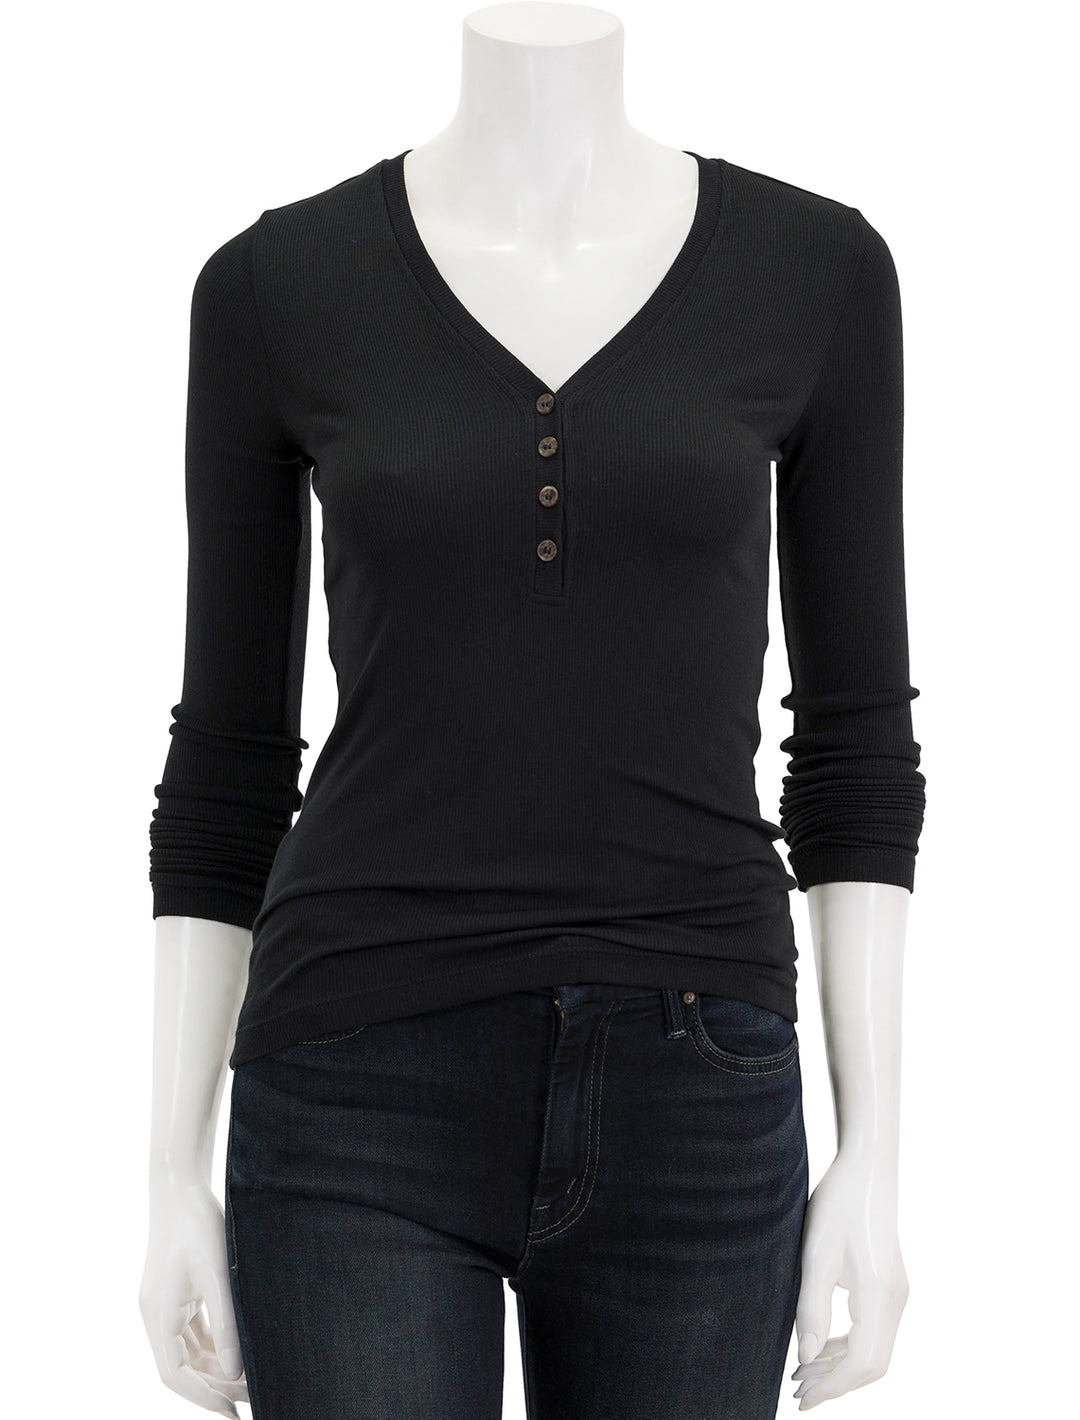 Front view of Marine Layer's lexi rib henley in black.